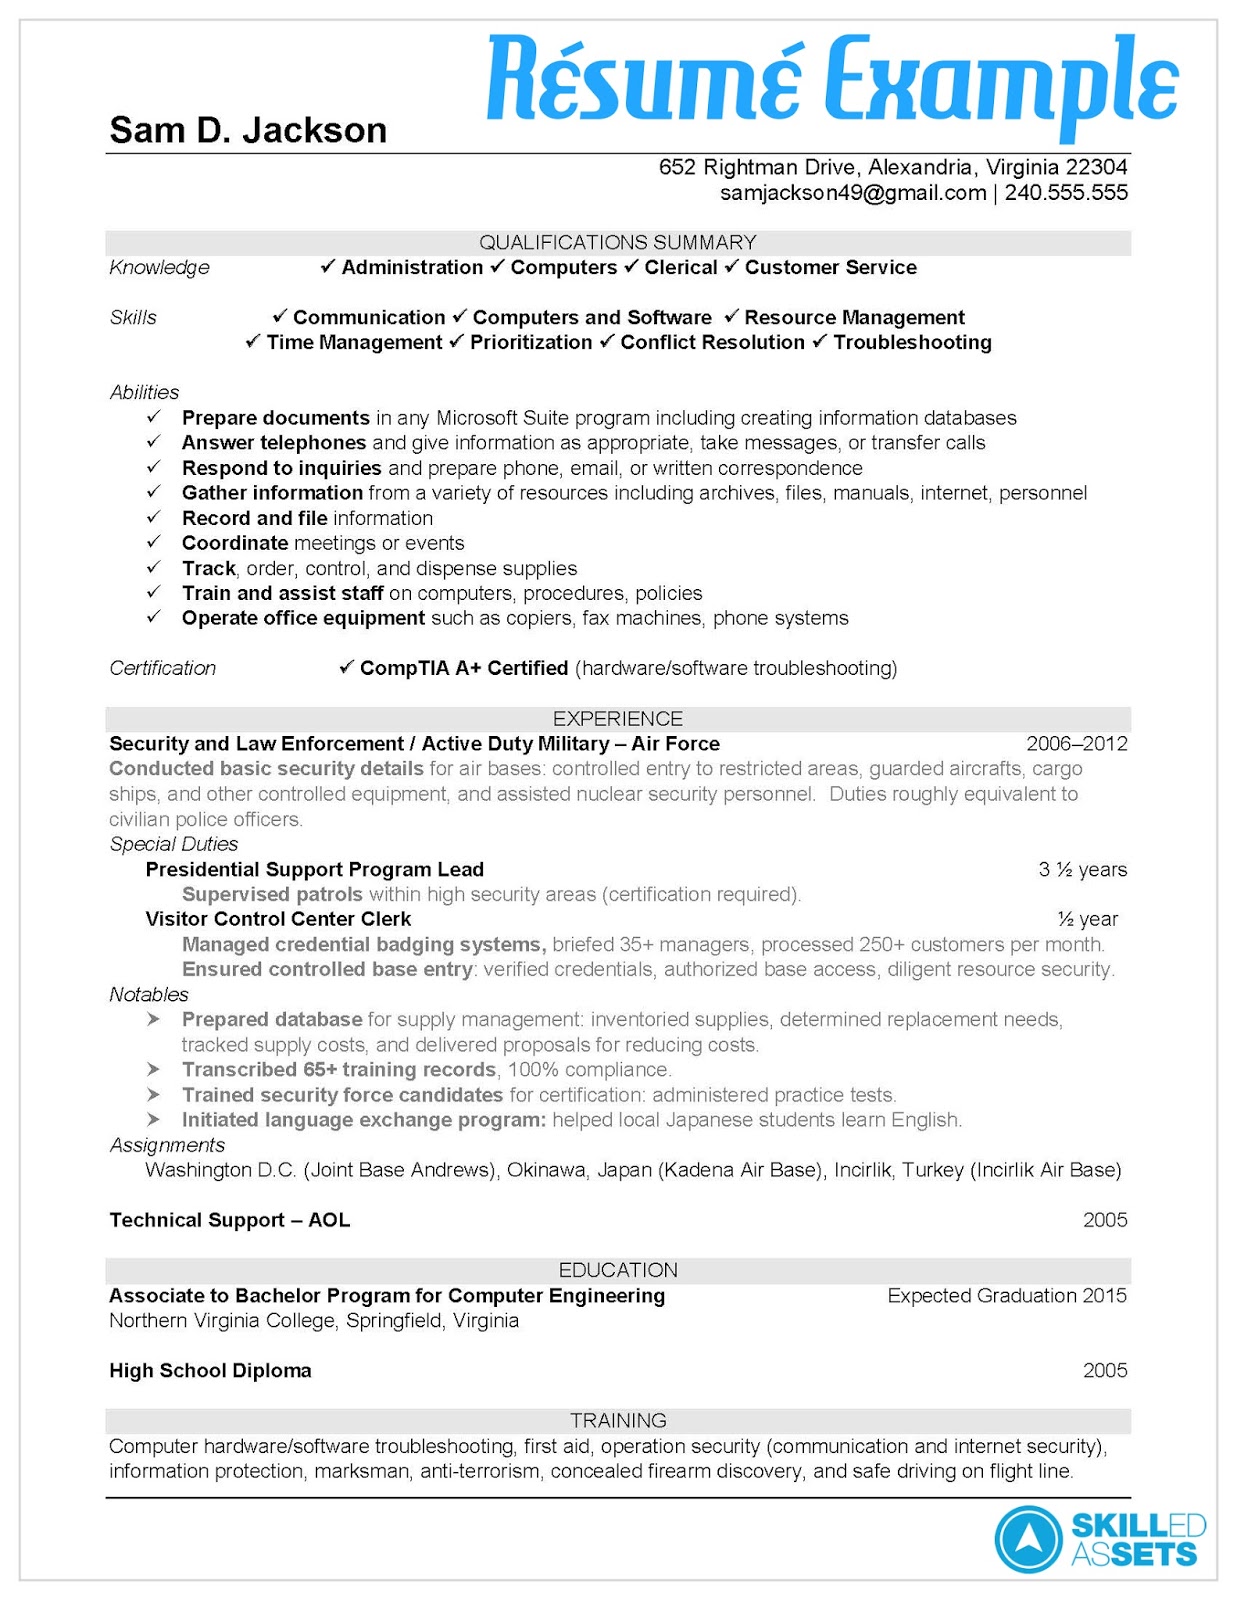 Attach formatted resume